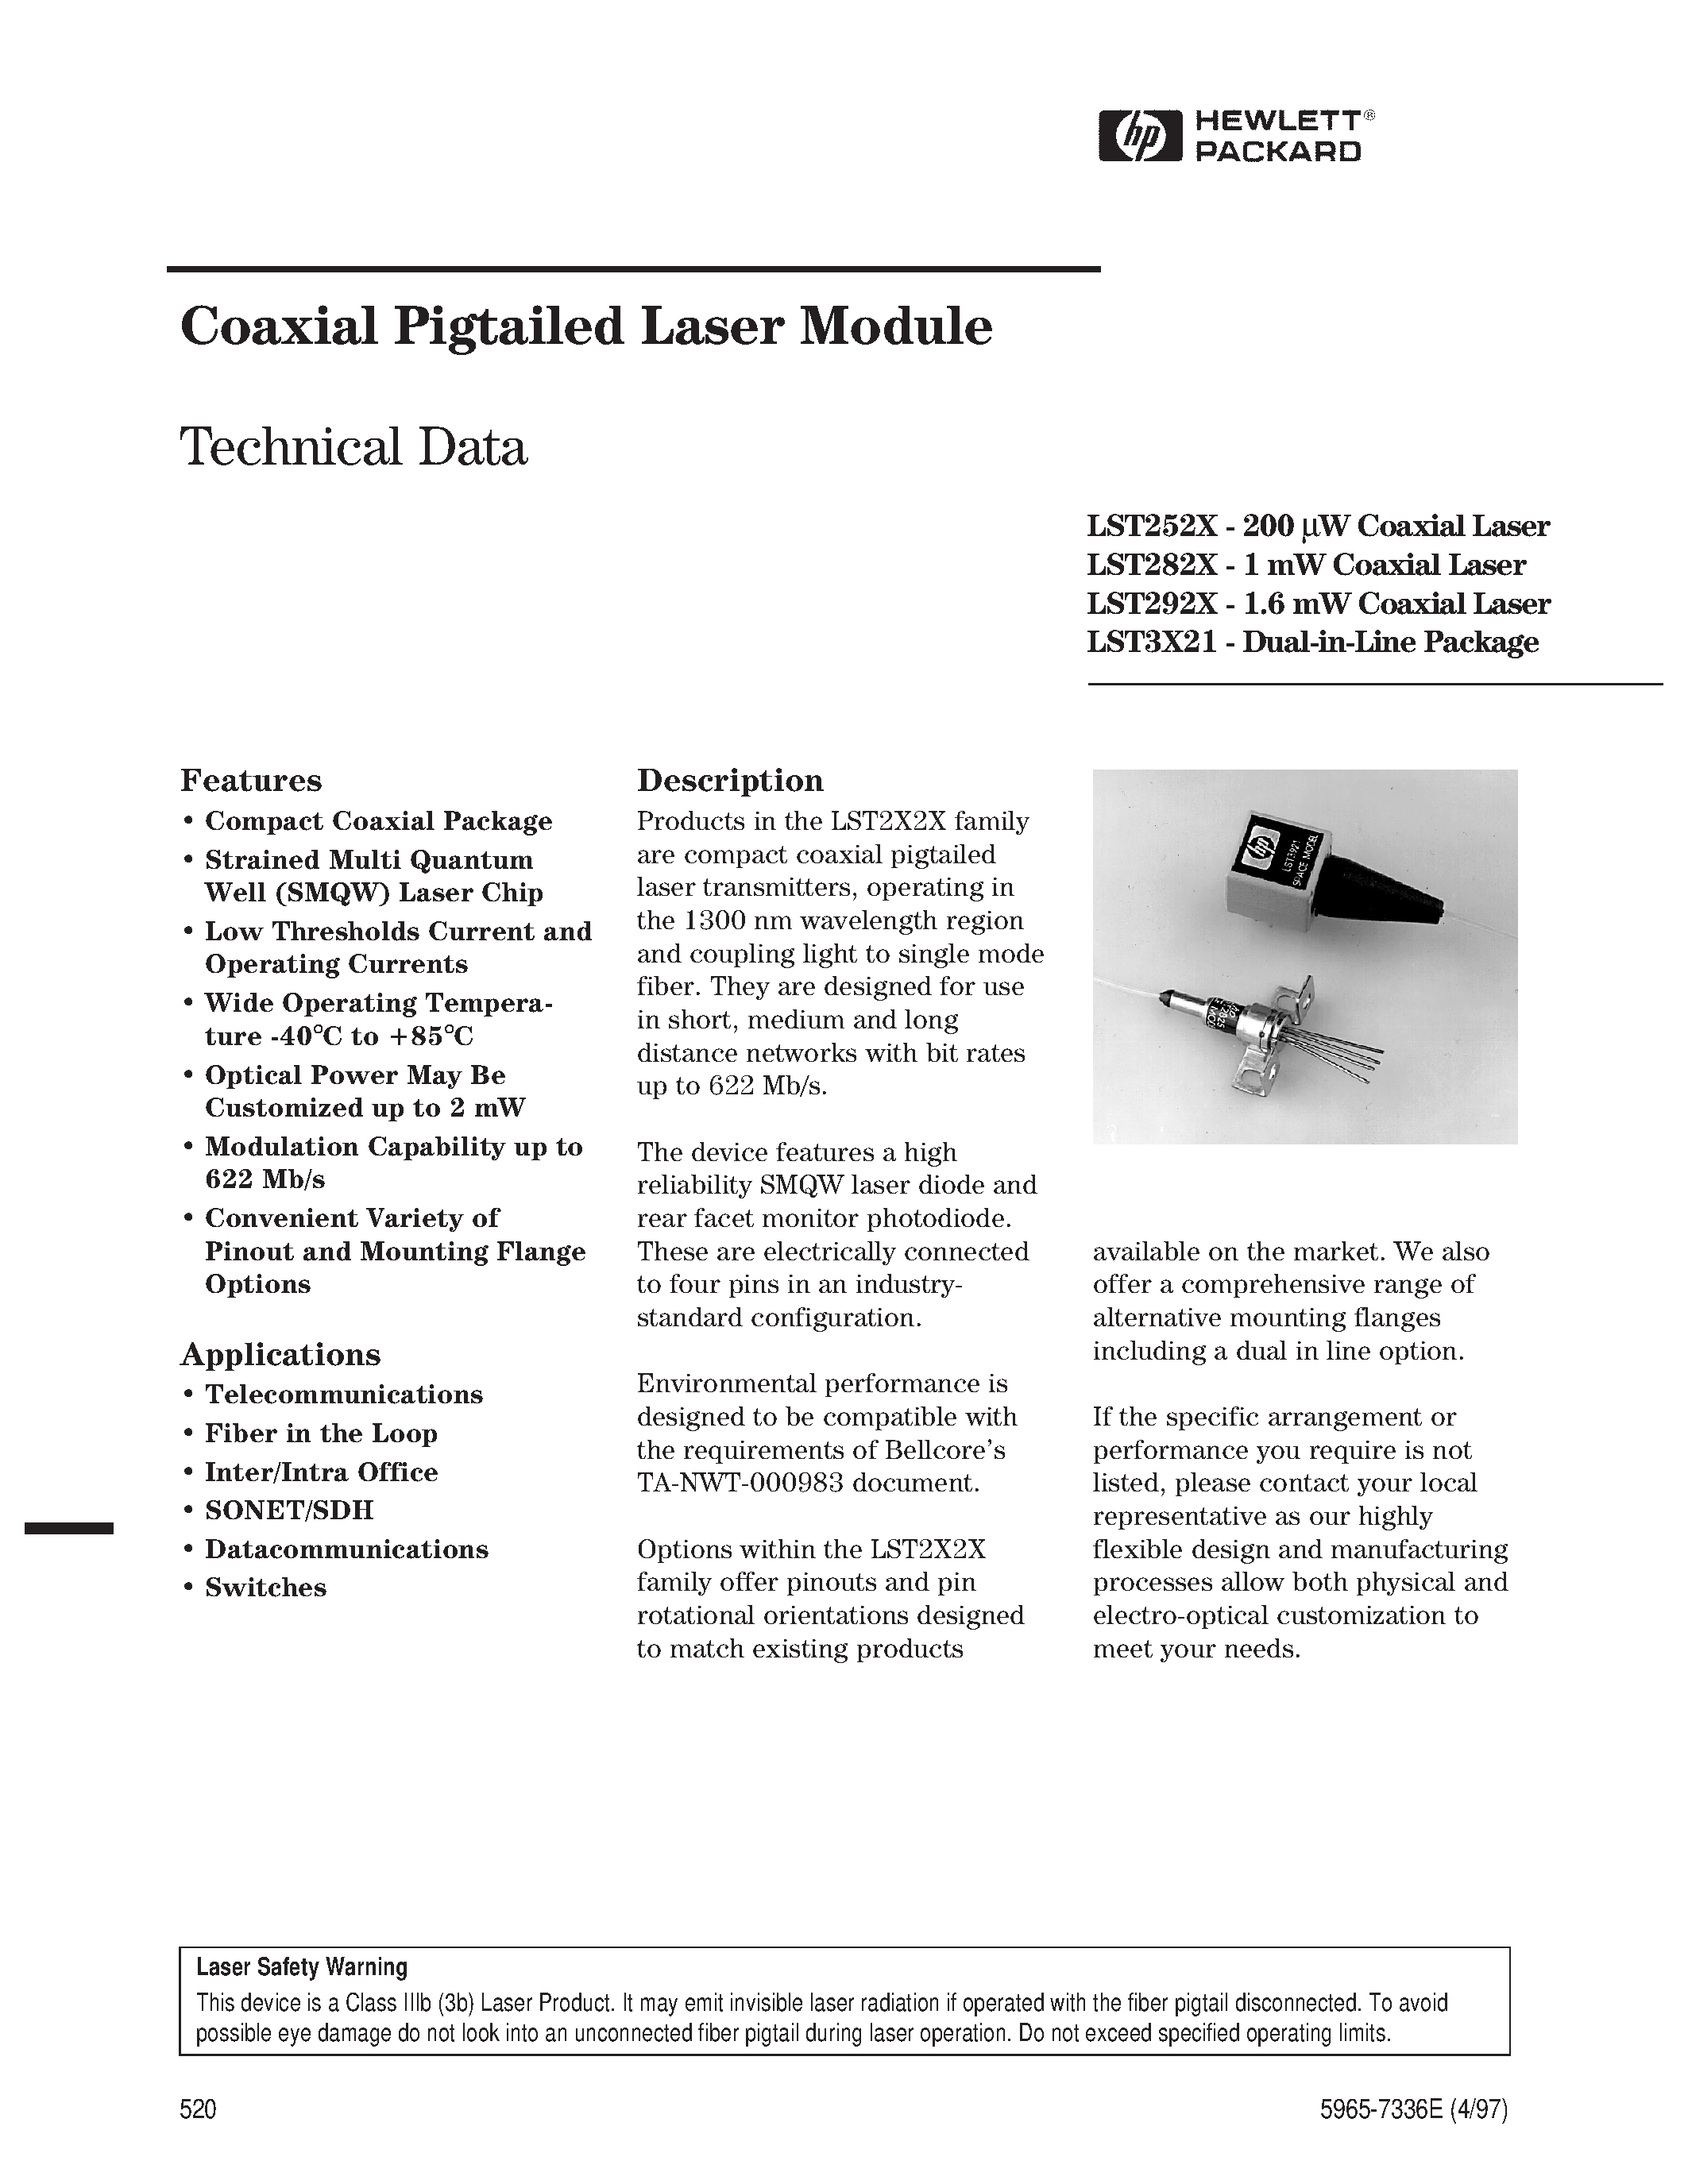 Datasheet LST2925-S4-T-SF - Coaxial Pigtailed Laser Module page 1